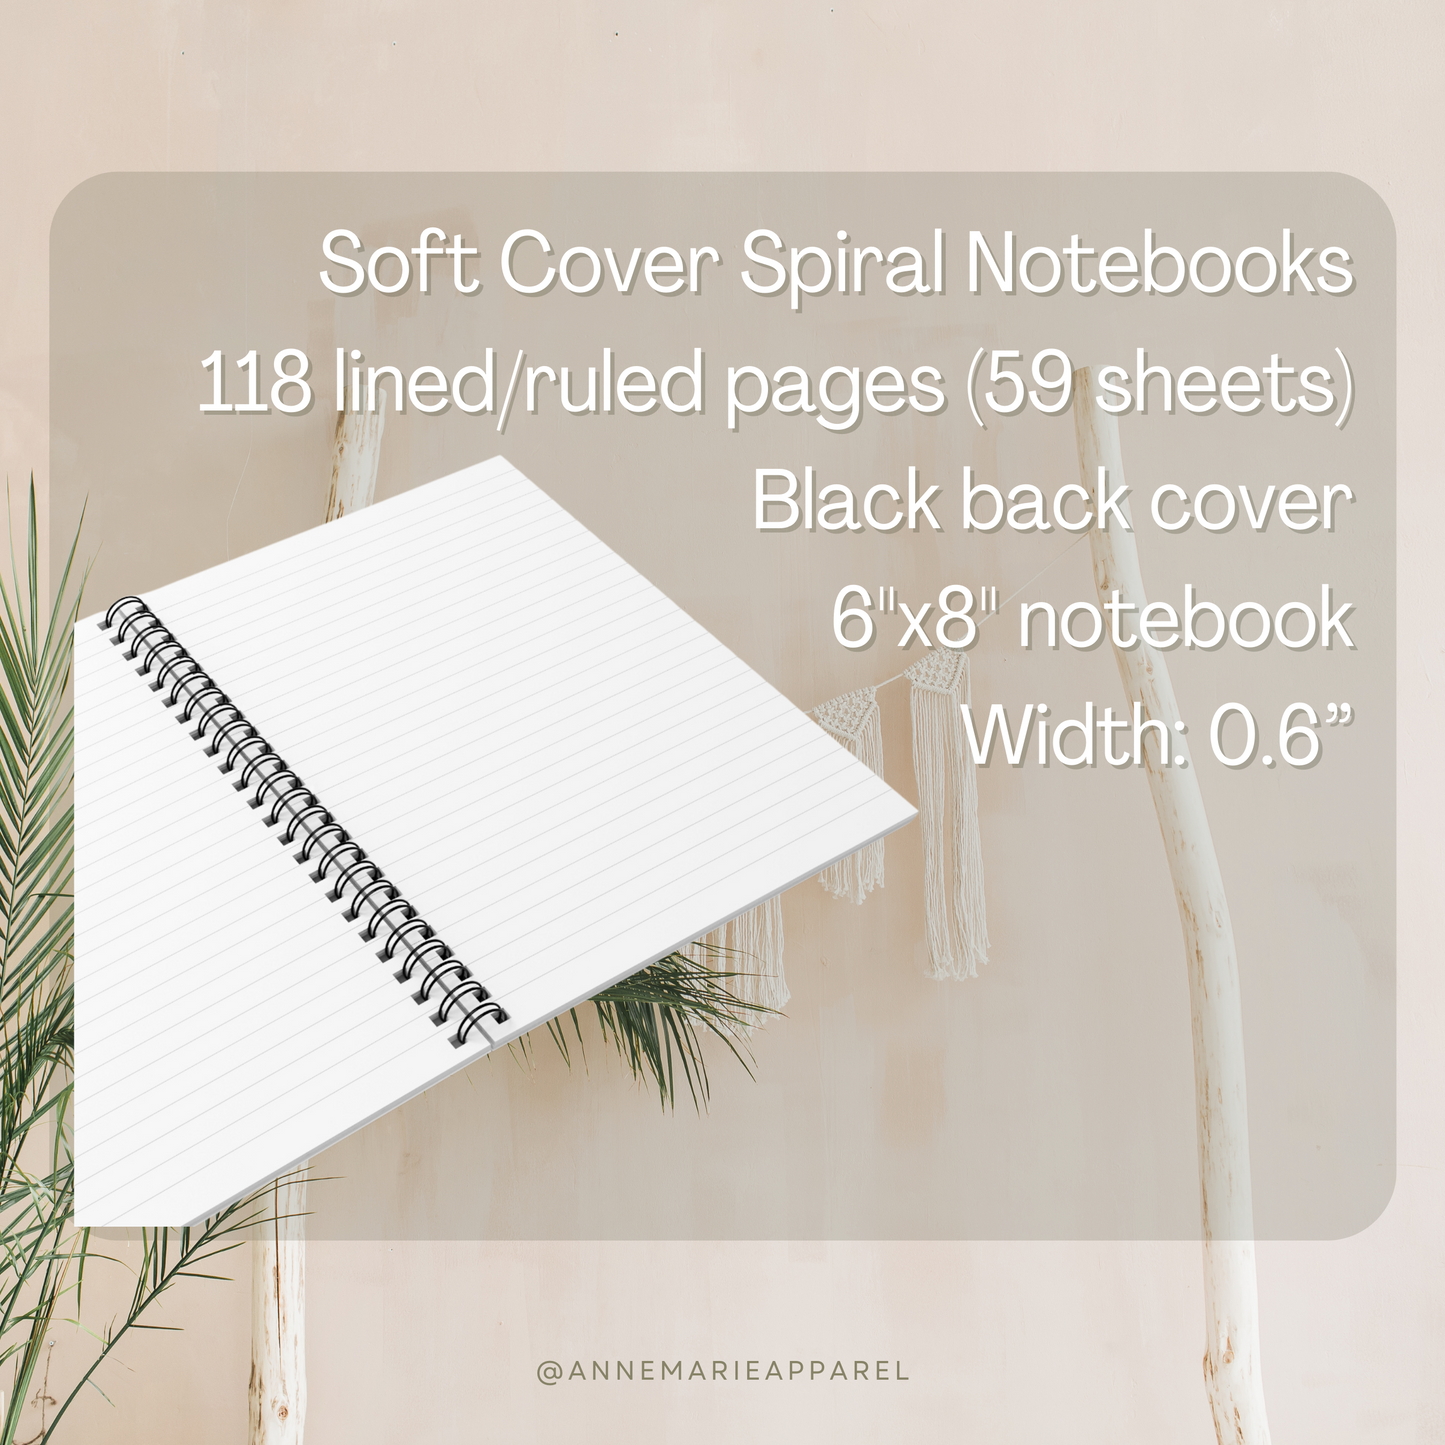 Happy Relaxed Engaged Spiral Notebook - Ruled Line